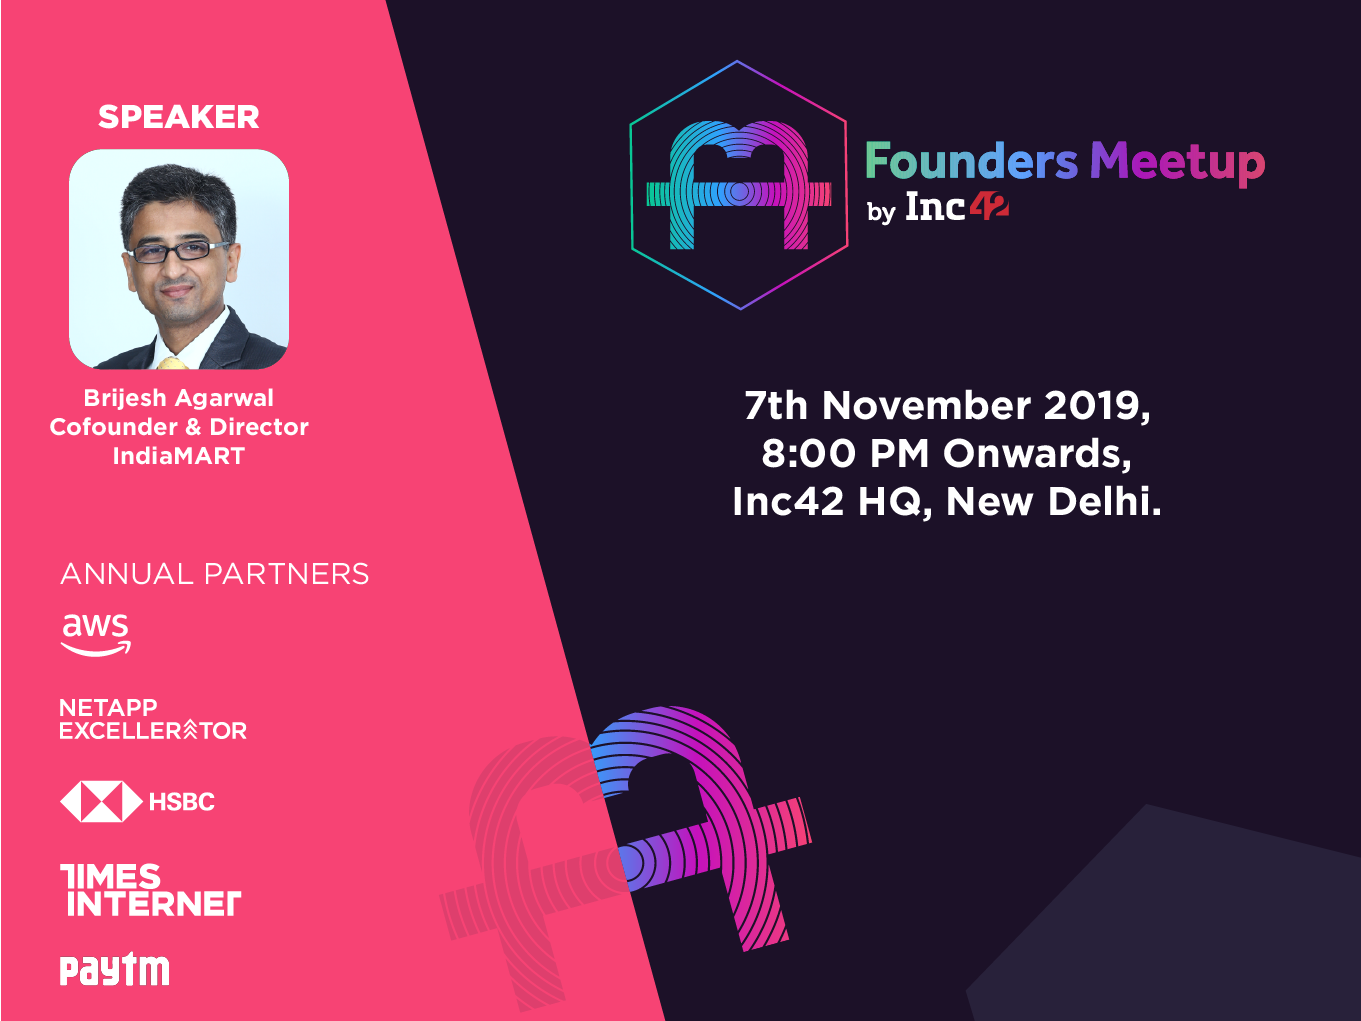 Founders Meetup In Delhi On Nov 7: IndiaMART’s Brijesh Agrawal To Engage With Early-Stage Entrepreneurs